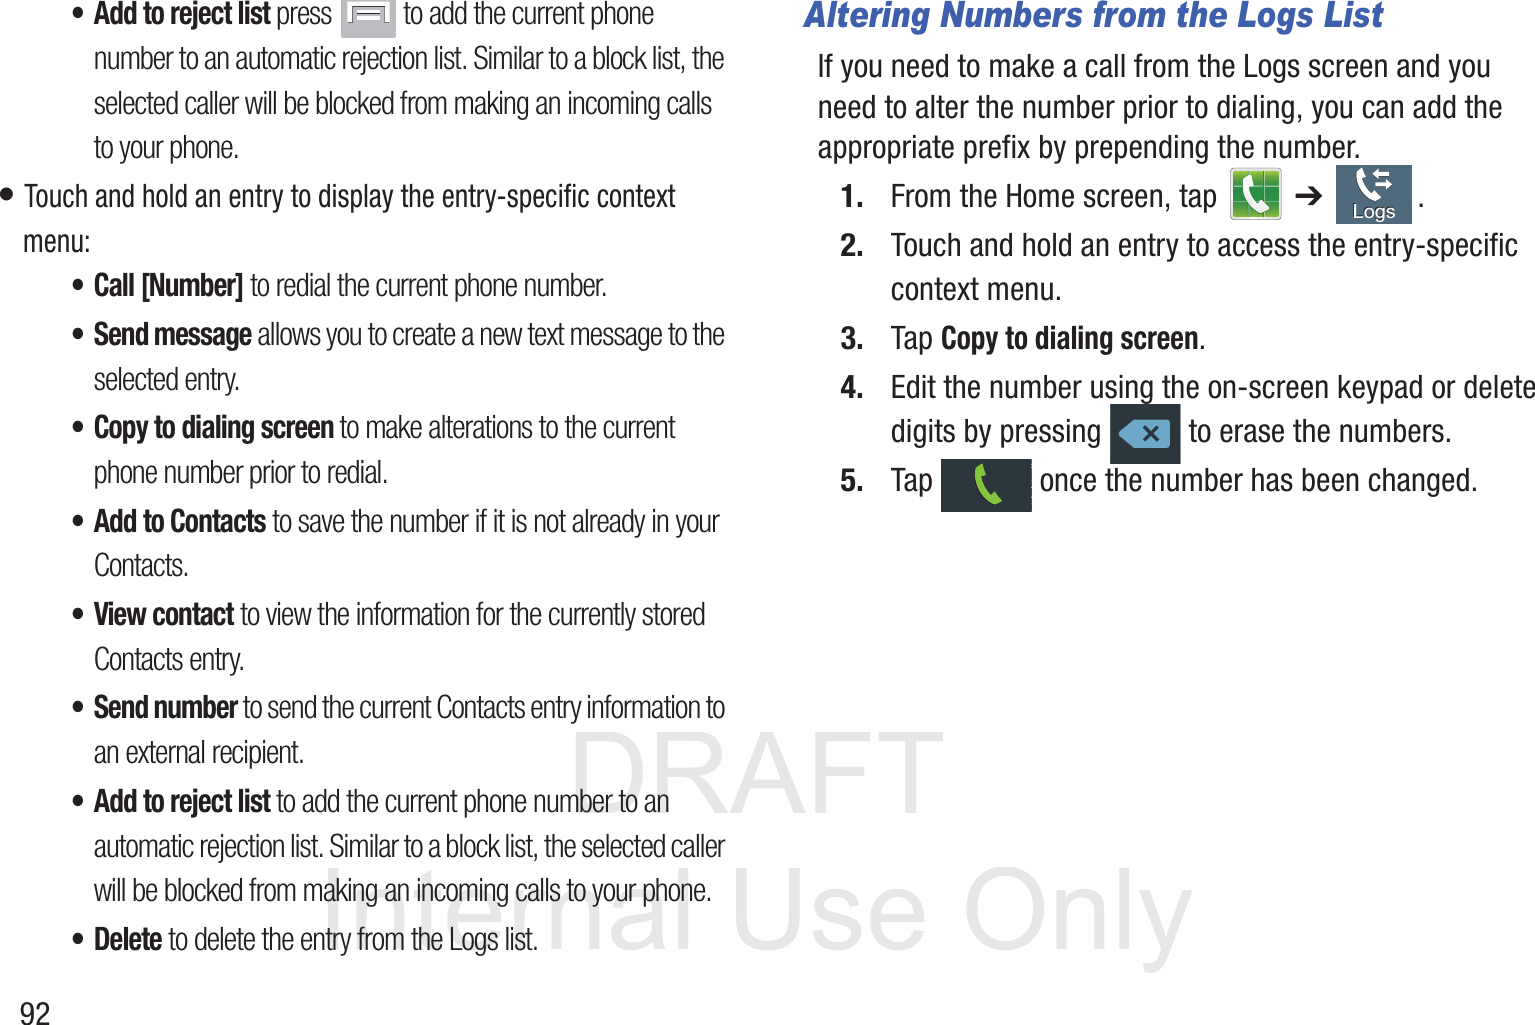 DRAFT InternalUse Only92• Add to reject list press   to add the current phone number to an automatic rejection list. Similar to a block list, the selected caller will be blocked from making an incoming calls to your phone.• Touch and hold an entry to display the entry-specific context menu:• Call [Number] to redial the current phone number. • Send message allows you to create a new text message to the selected entry.• Copy to dialing screen to make alterations to the current phone number prior to redial. • Add to Contacts to save the number if it is not already in your Contacts.• View contact to view the information for the currently stored Contacts entry.• Send number to send the current Contacts entry information to an external recipient.• Add to reject list to add the current phone number to an automatic rejection list. Similar to a block list, the selected caller will be blocked from making an incoming calls to your phone.•Delete to delete the entry from the Logs list.Altering Numbers from the Logs ListIf you need to make a call from the Logs screen and you need to alter the number prior to dialing, you can add the appropriate prefix by prepending the number.1. From the Home screen, tap   ➔ .2. Touch and hold an entry to access the entry-specific context menu.3. Tap Copy to dialing screen.4. Edit the number using the on-screen keypad or delete digits by pressing   to erase the numbers.5. Tap   once the number has been changed.LogsLogs